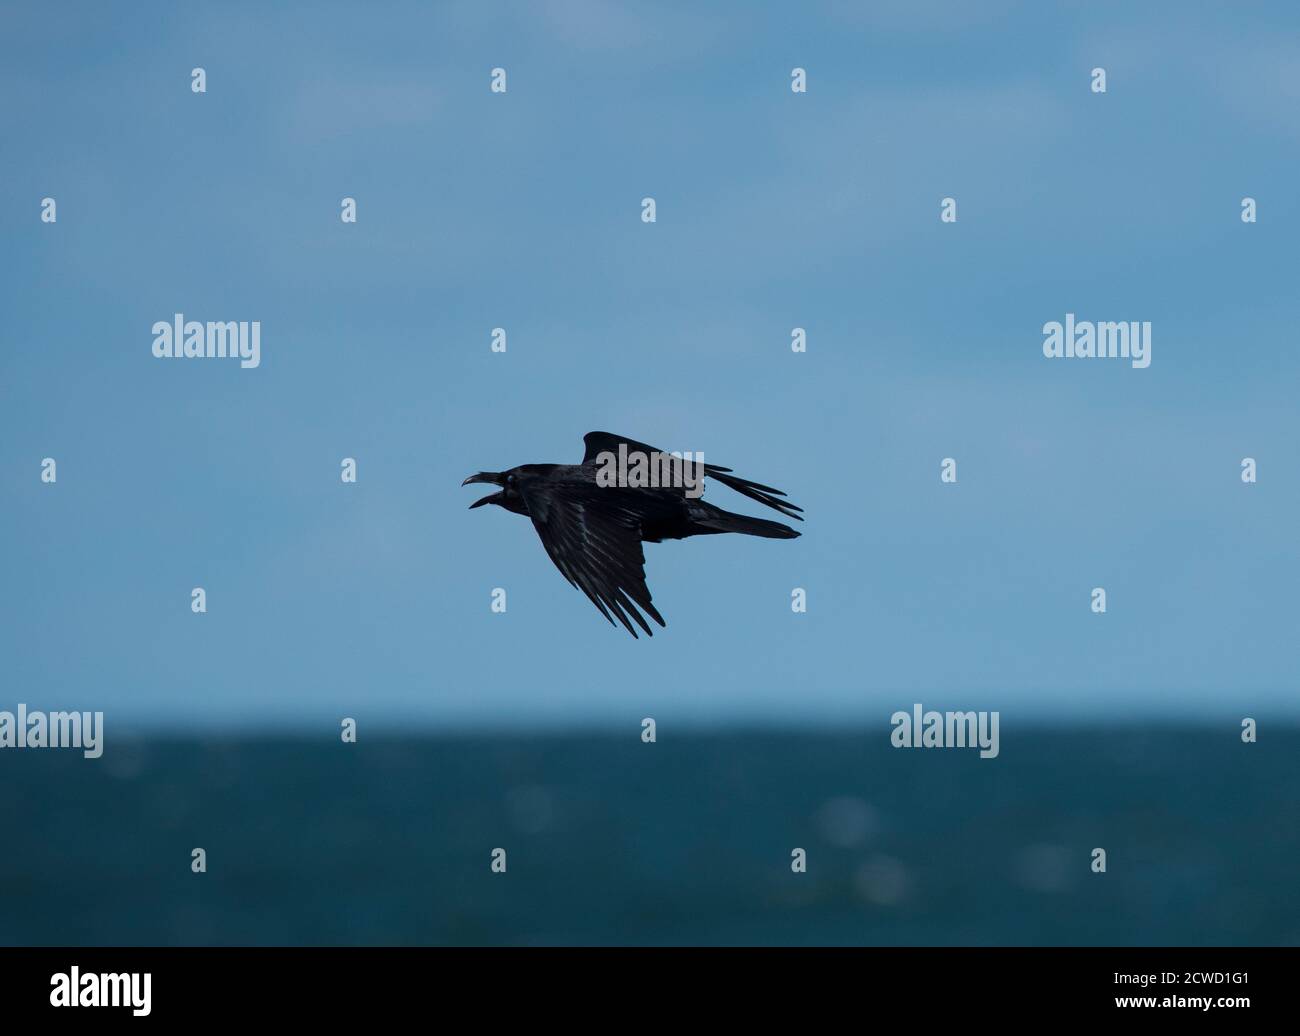 Raven (Corvus corax) in flight over the sea in Wales with a blue sky. Stock Photo